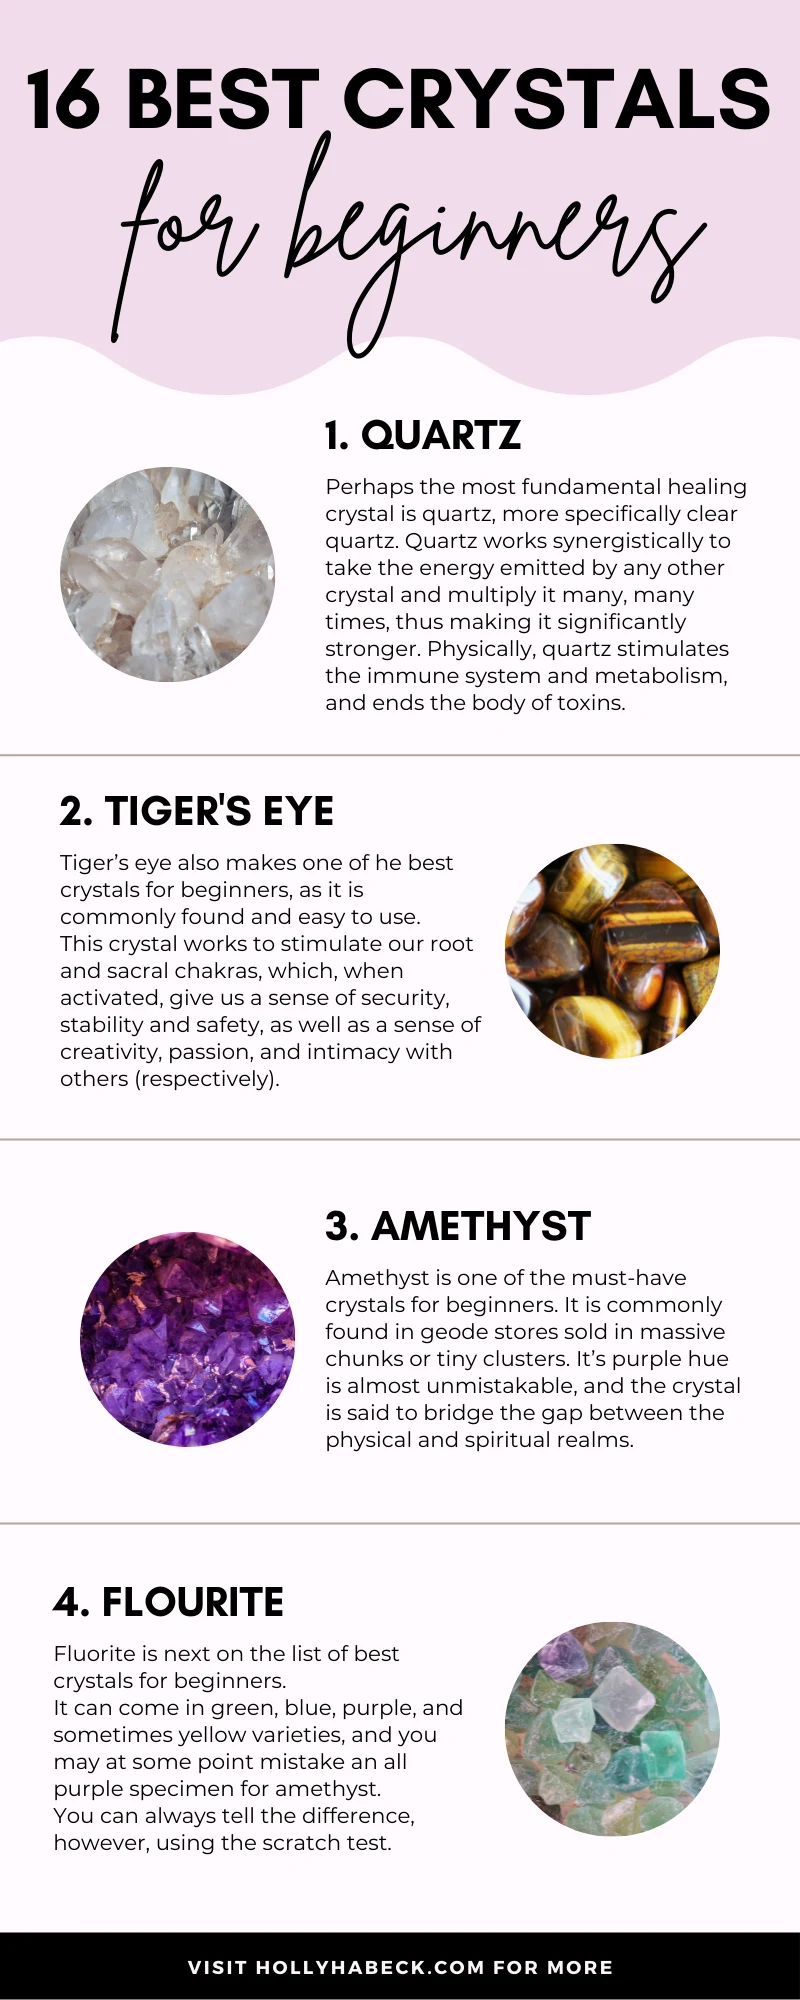 16 Best Crystals for Beginners